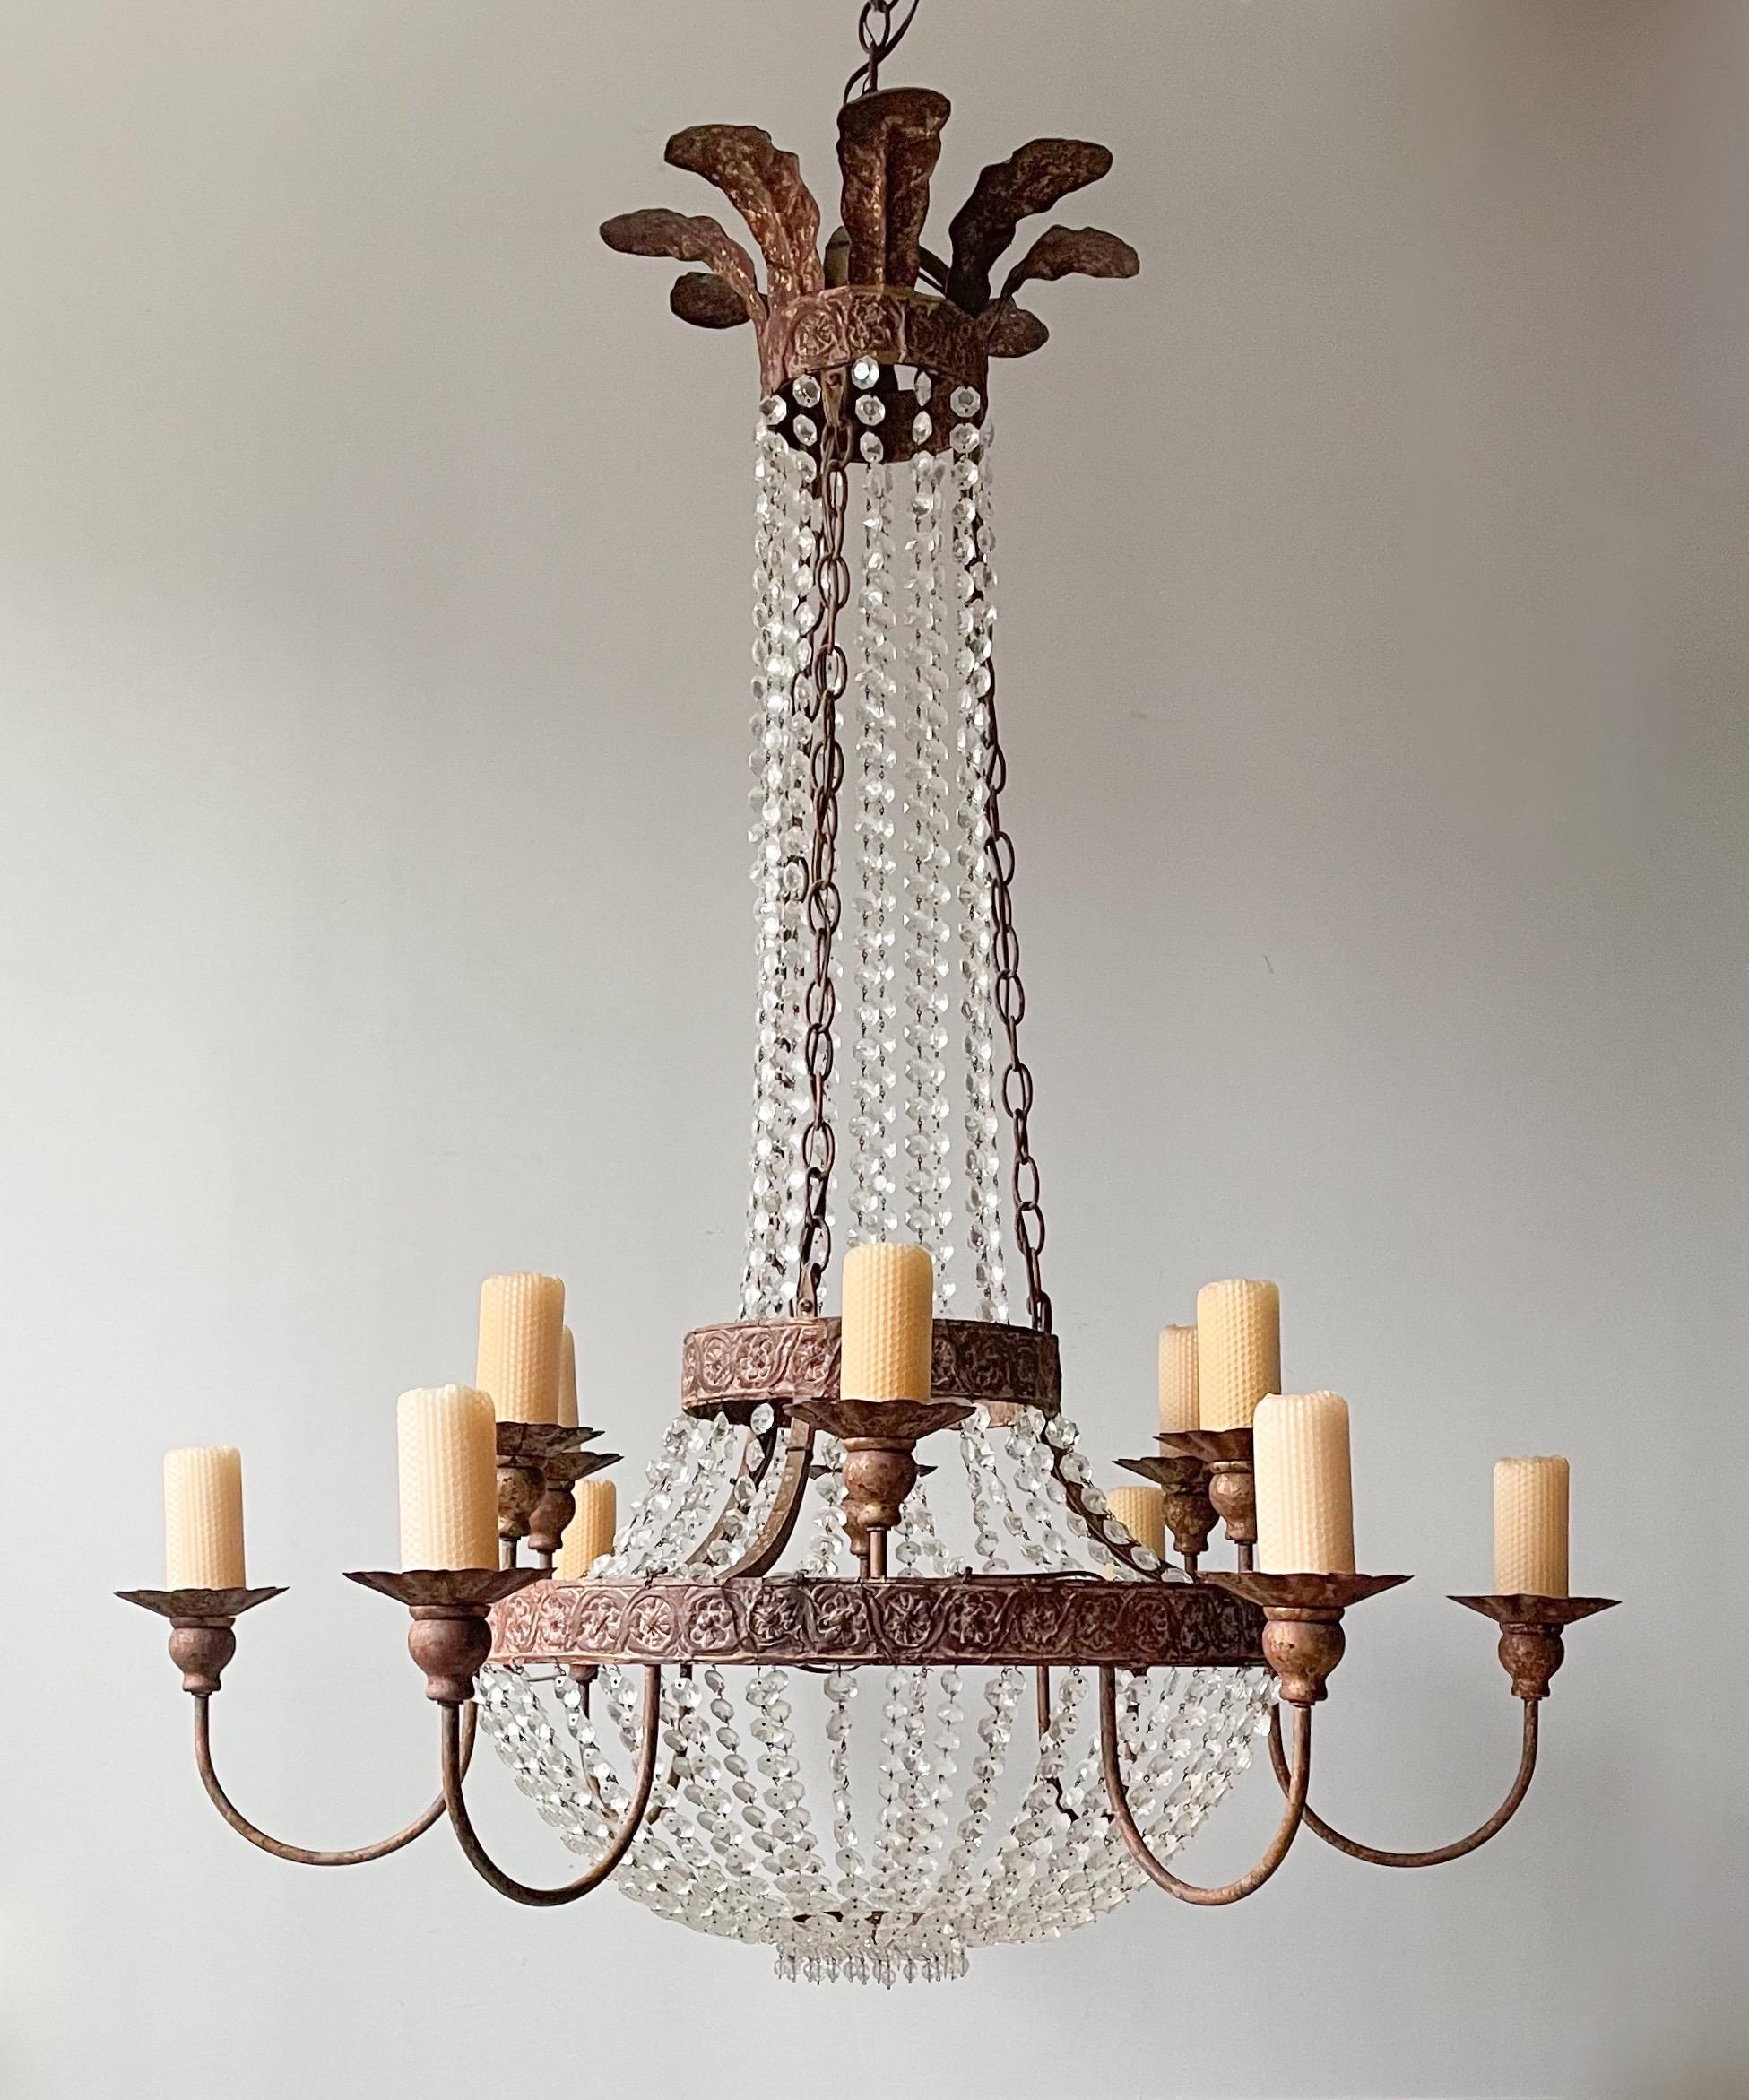 Gorgeous “Iron And Crystal Chandelier” by Niermann Weeks in the Empire style. 

The chandelier features an iron frame with repoussé details and a beautiful, distressed “antique gilt” finish. A multitude of crystal beaded strands gracefully drape